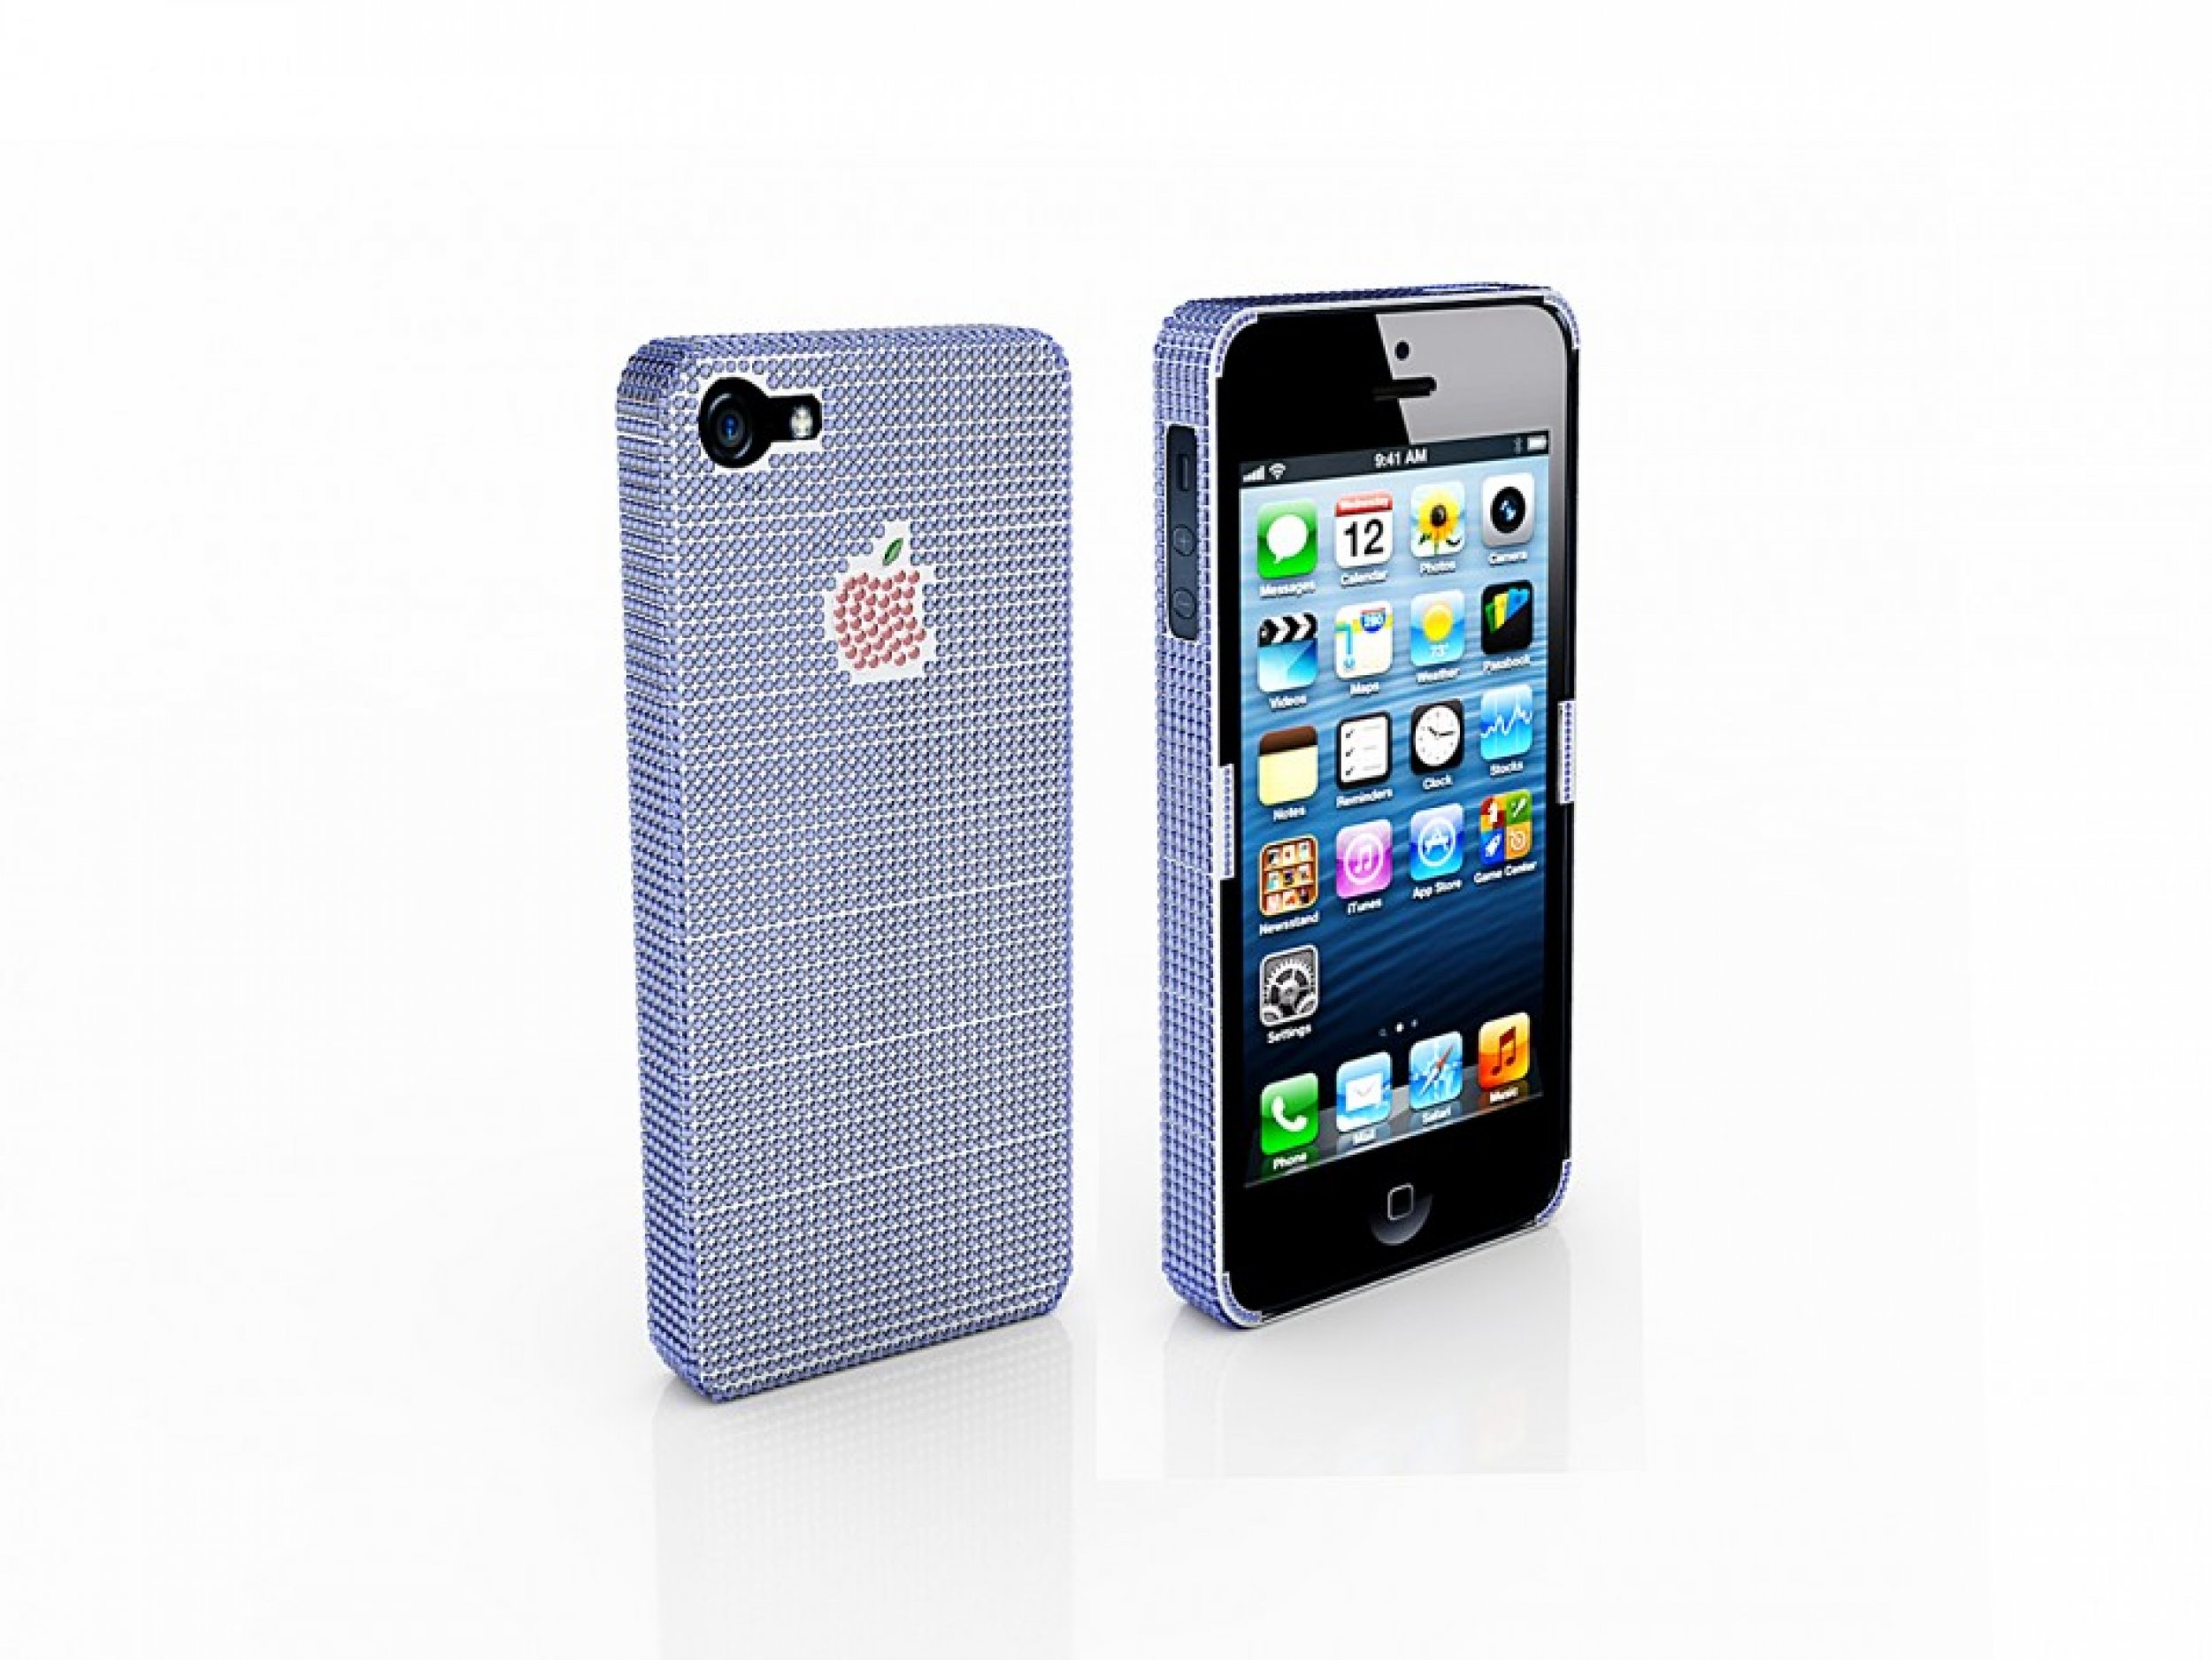 10. The 100,000 iPhone 5 Case - Available for 100,000 